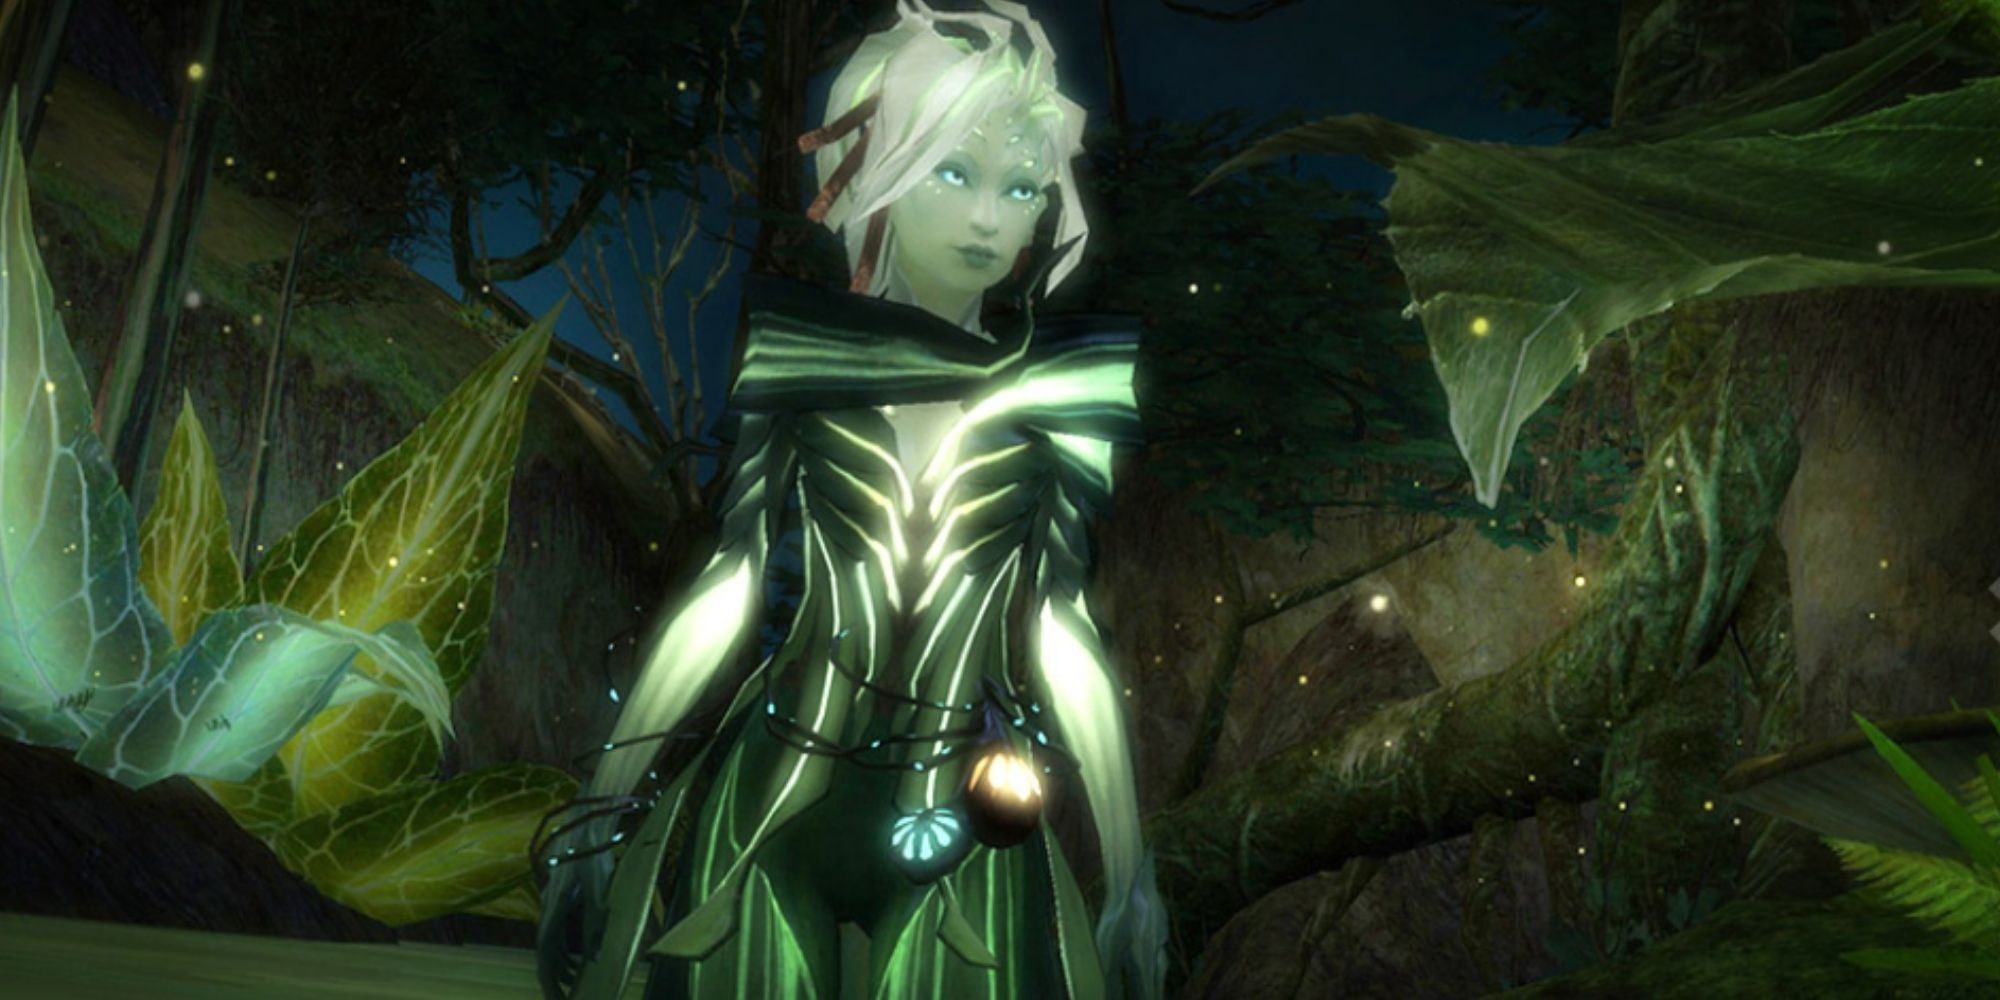 guild wars 2 free trial limitations